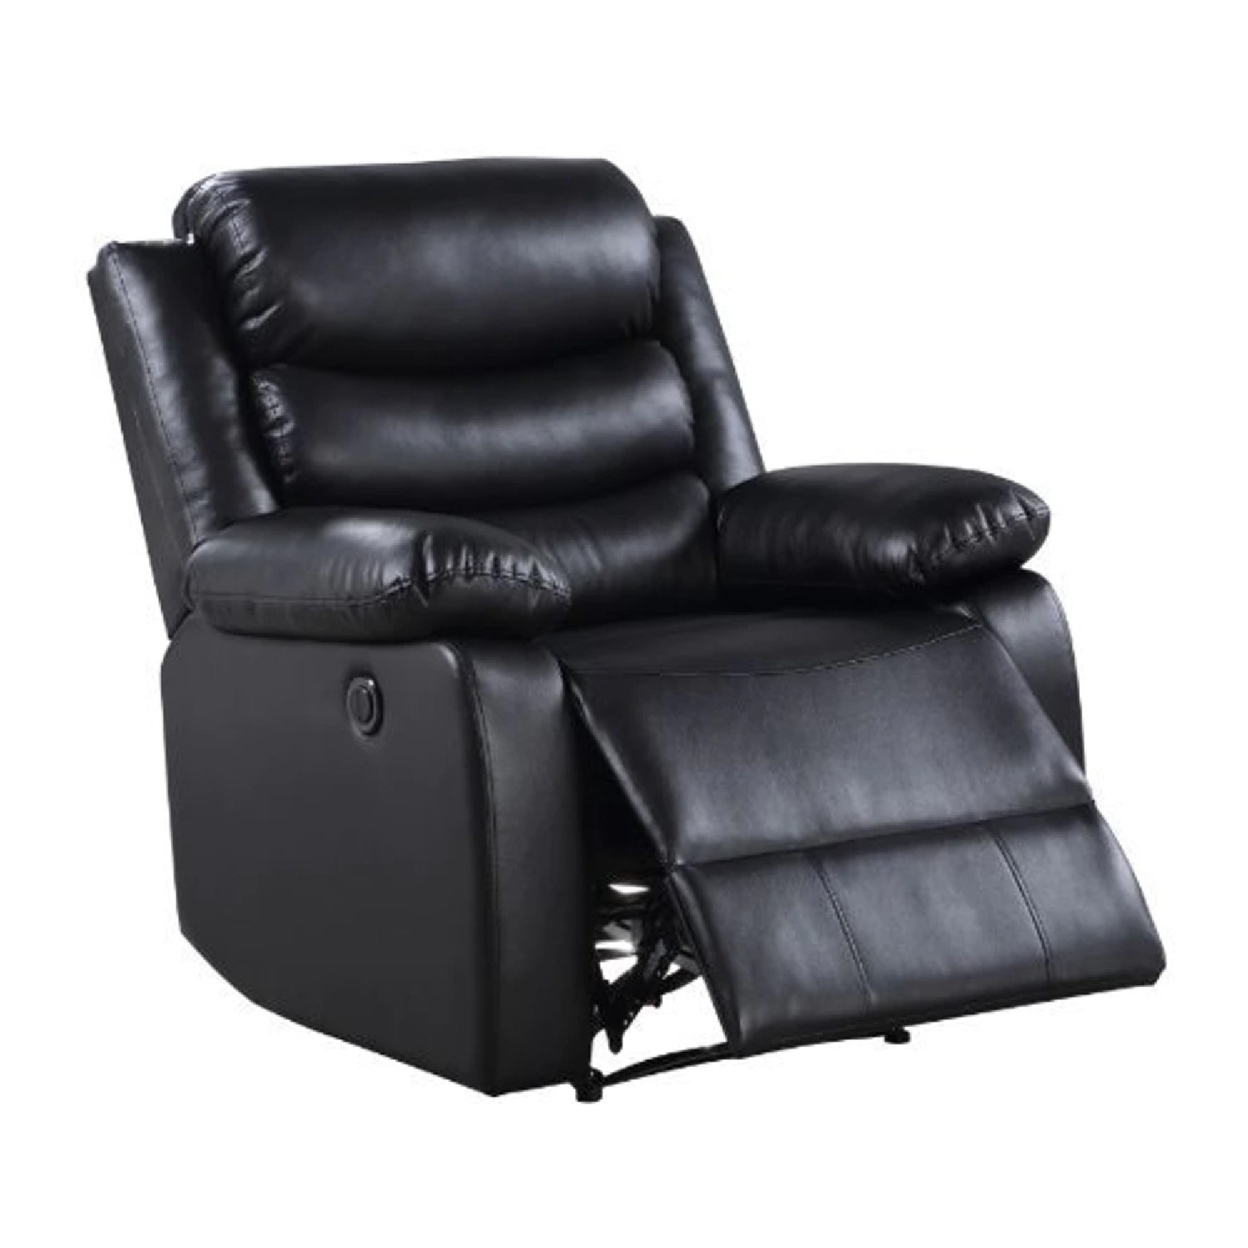 Power Recliner With Pocket Coil Seating And Pillow Top Arms, Black- Saltoro Sherpi